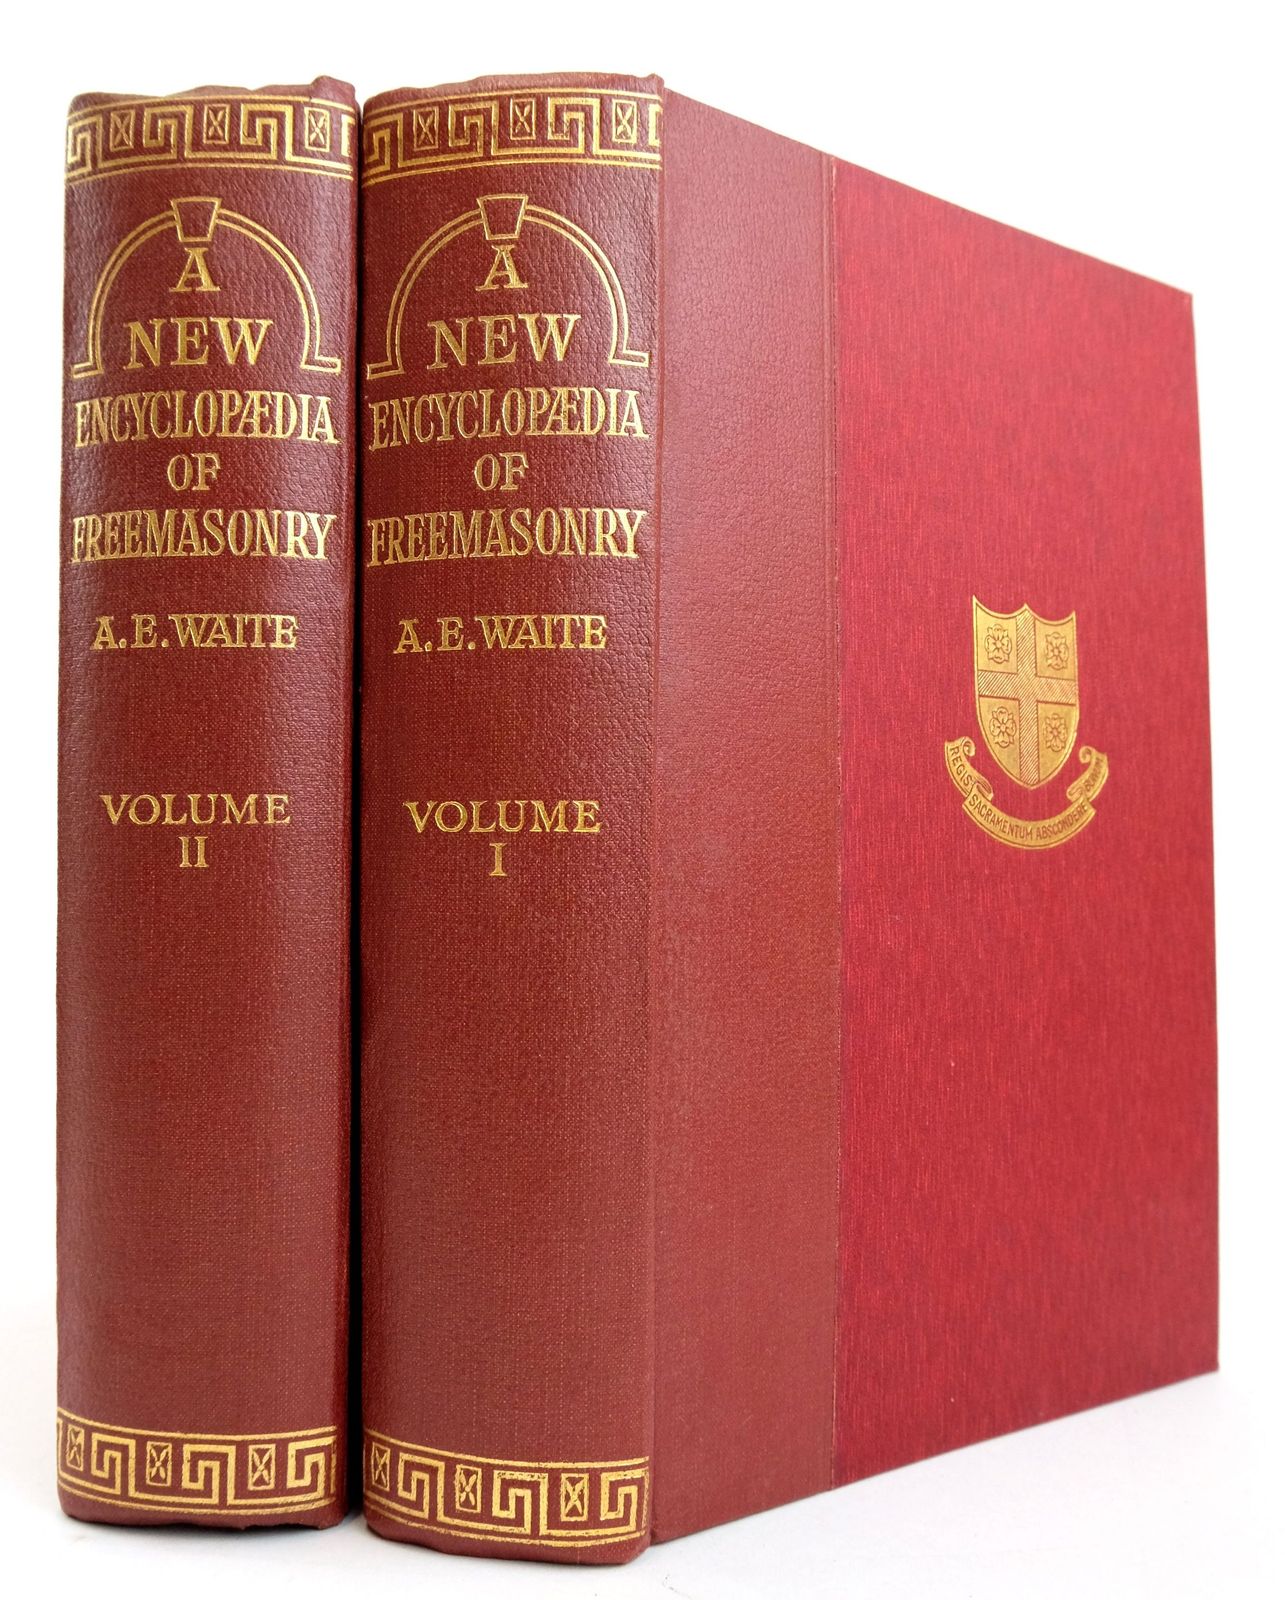 Photo of A NEW ENCYCLOPAEDIA OF FREEMASONRY (ARS MAGNA LATOMORUM) 2 VOLUMES written by Waiter, Arthur Edward published by Rider & Co. (STOCK CODE: 1820100)  for sale by Stella & Rose's Books